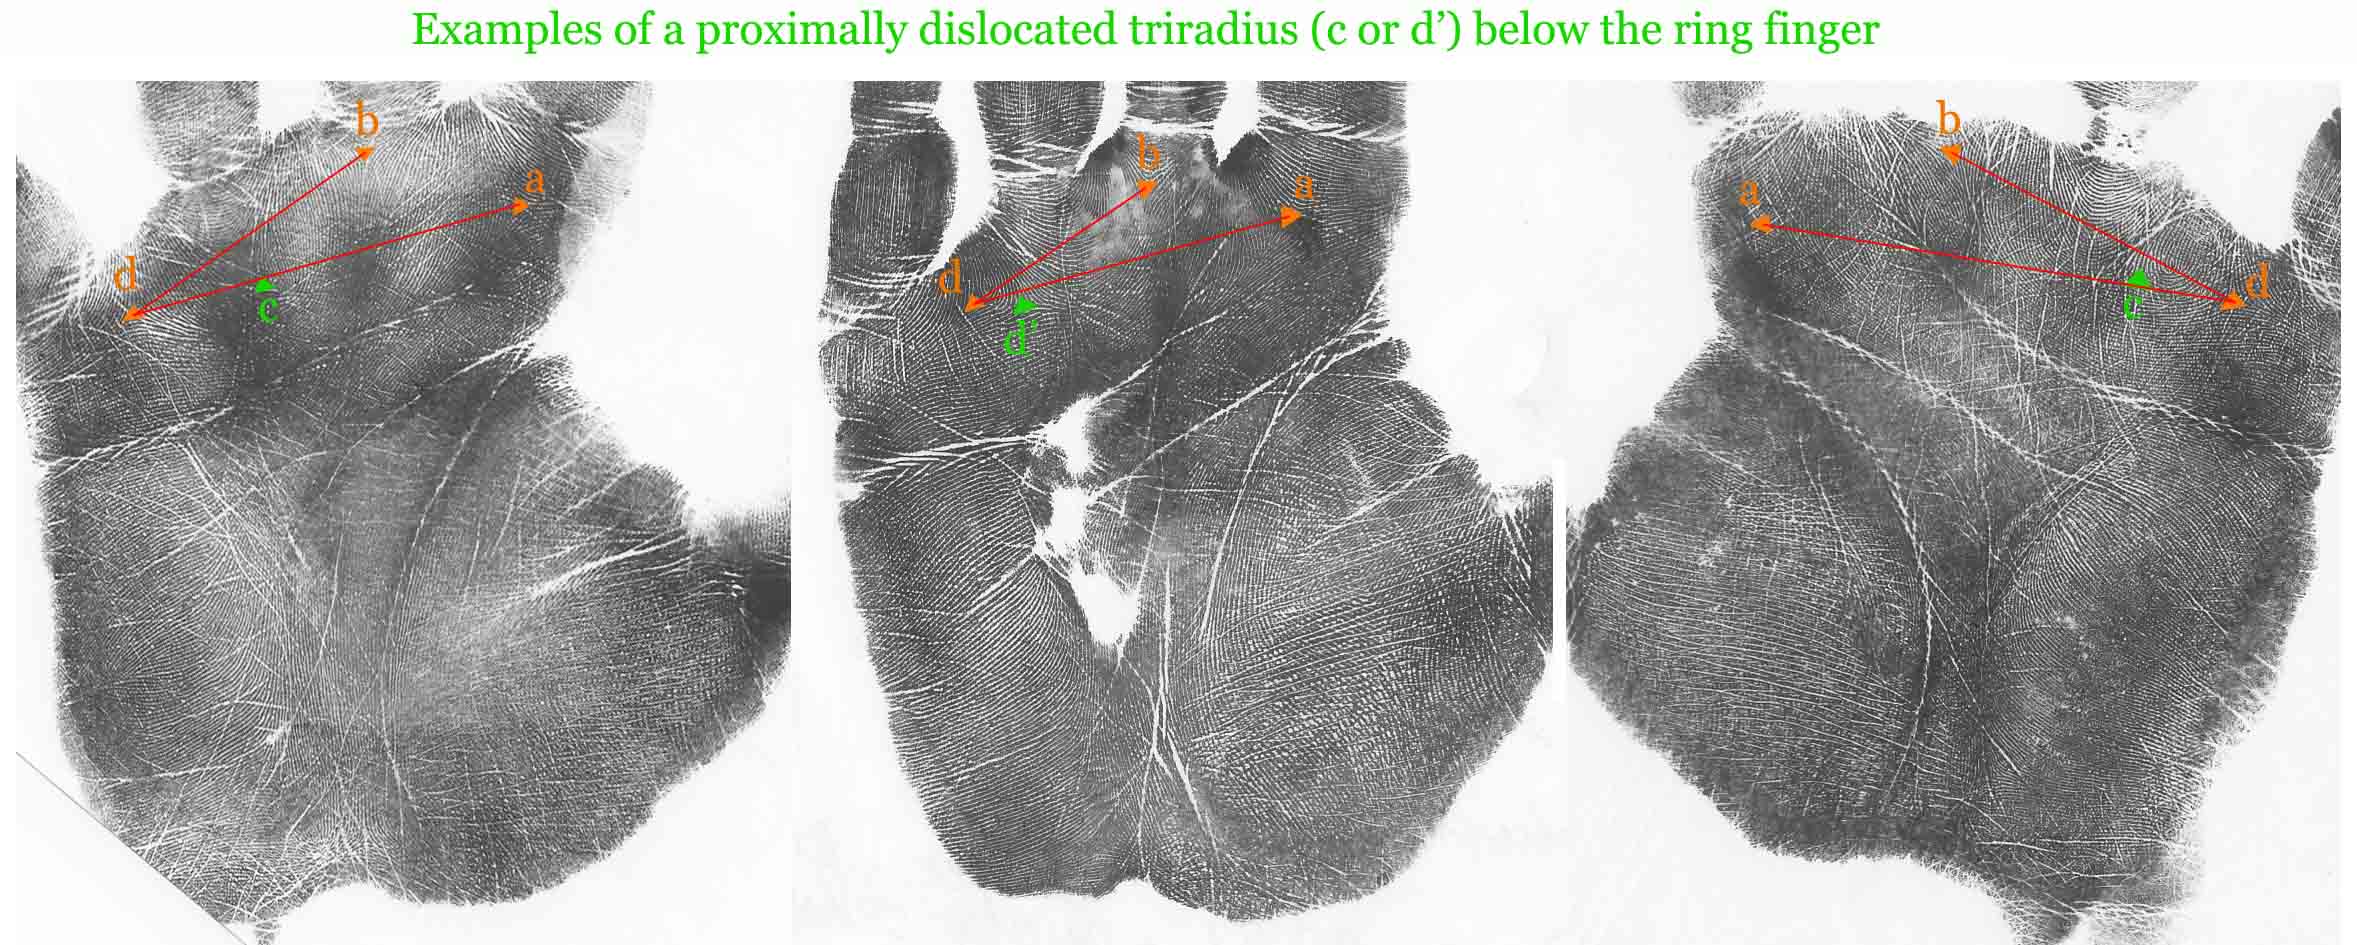 Examples of a proximally dislocated triradius below the ring finger.